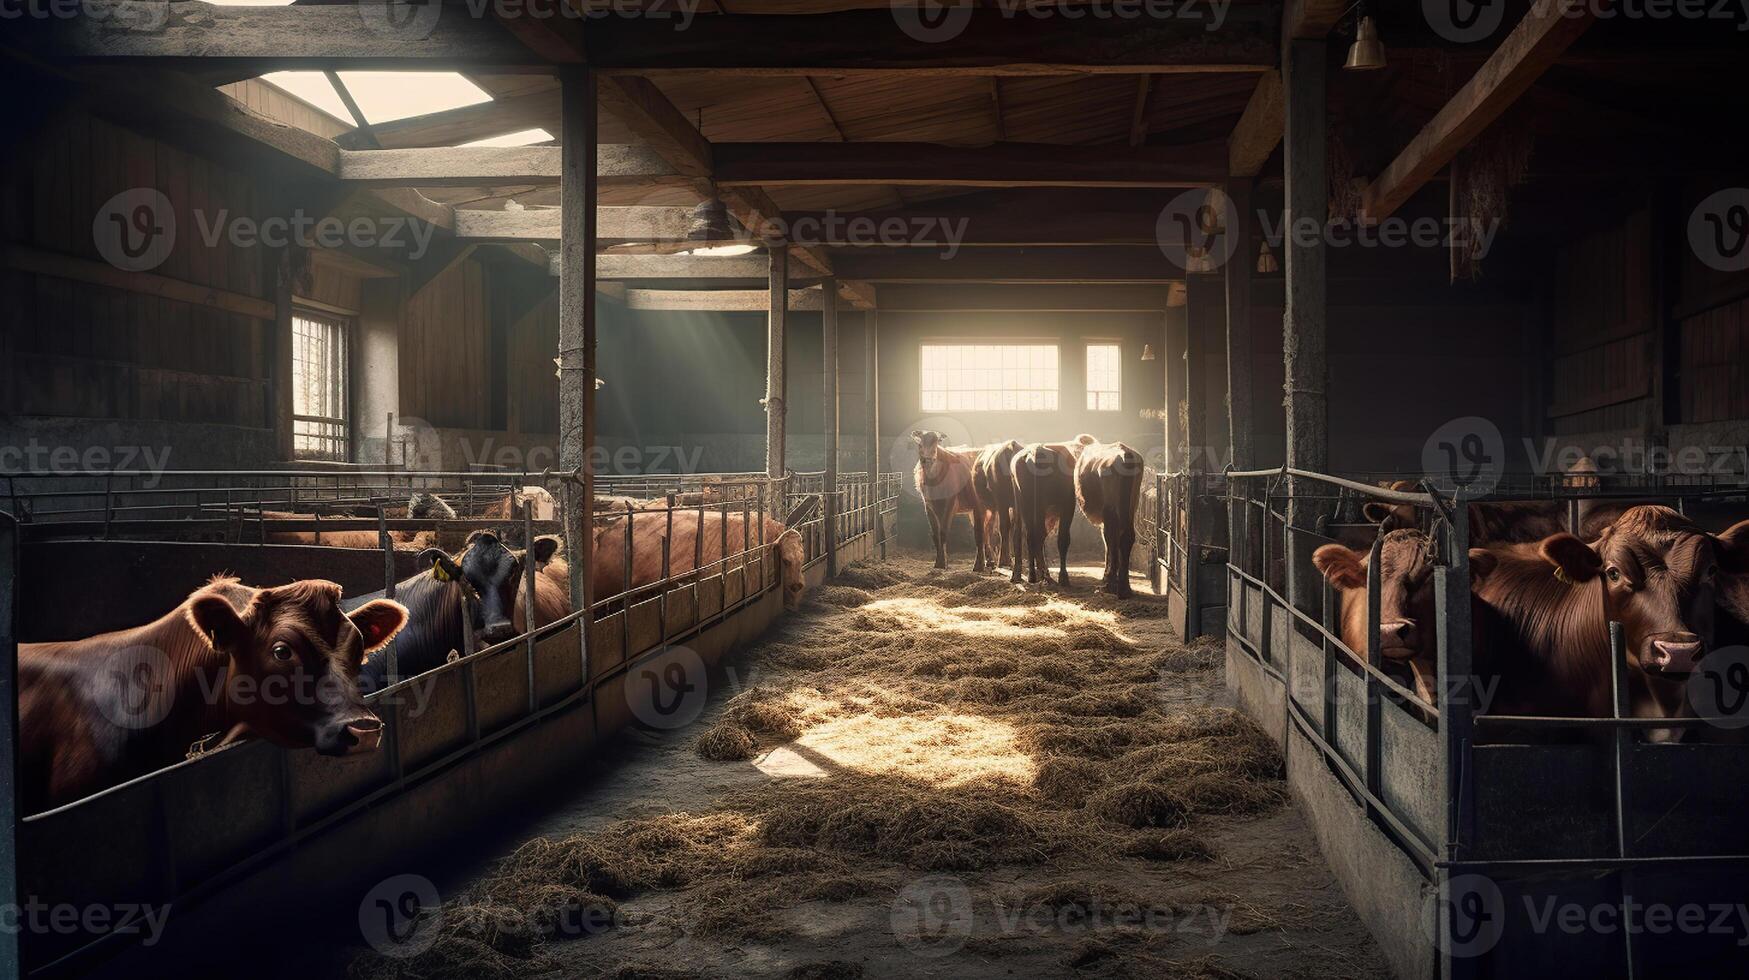 Cattle reproduction and calves being kept inside the box separately, image photo